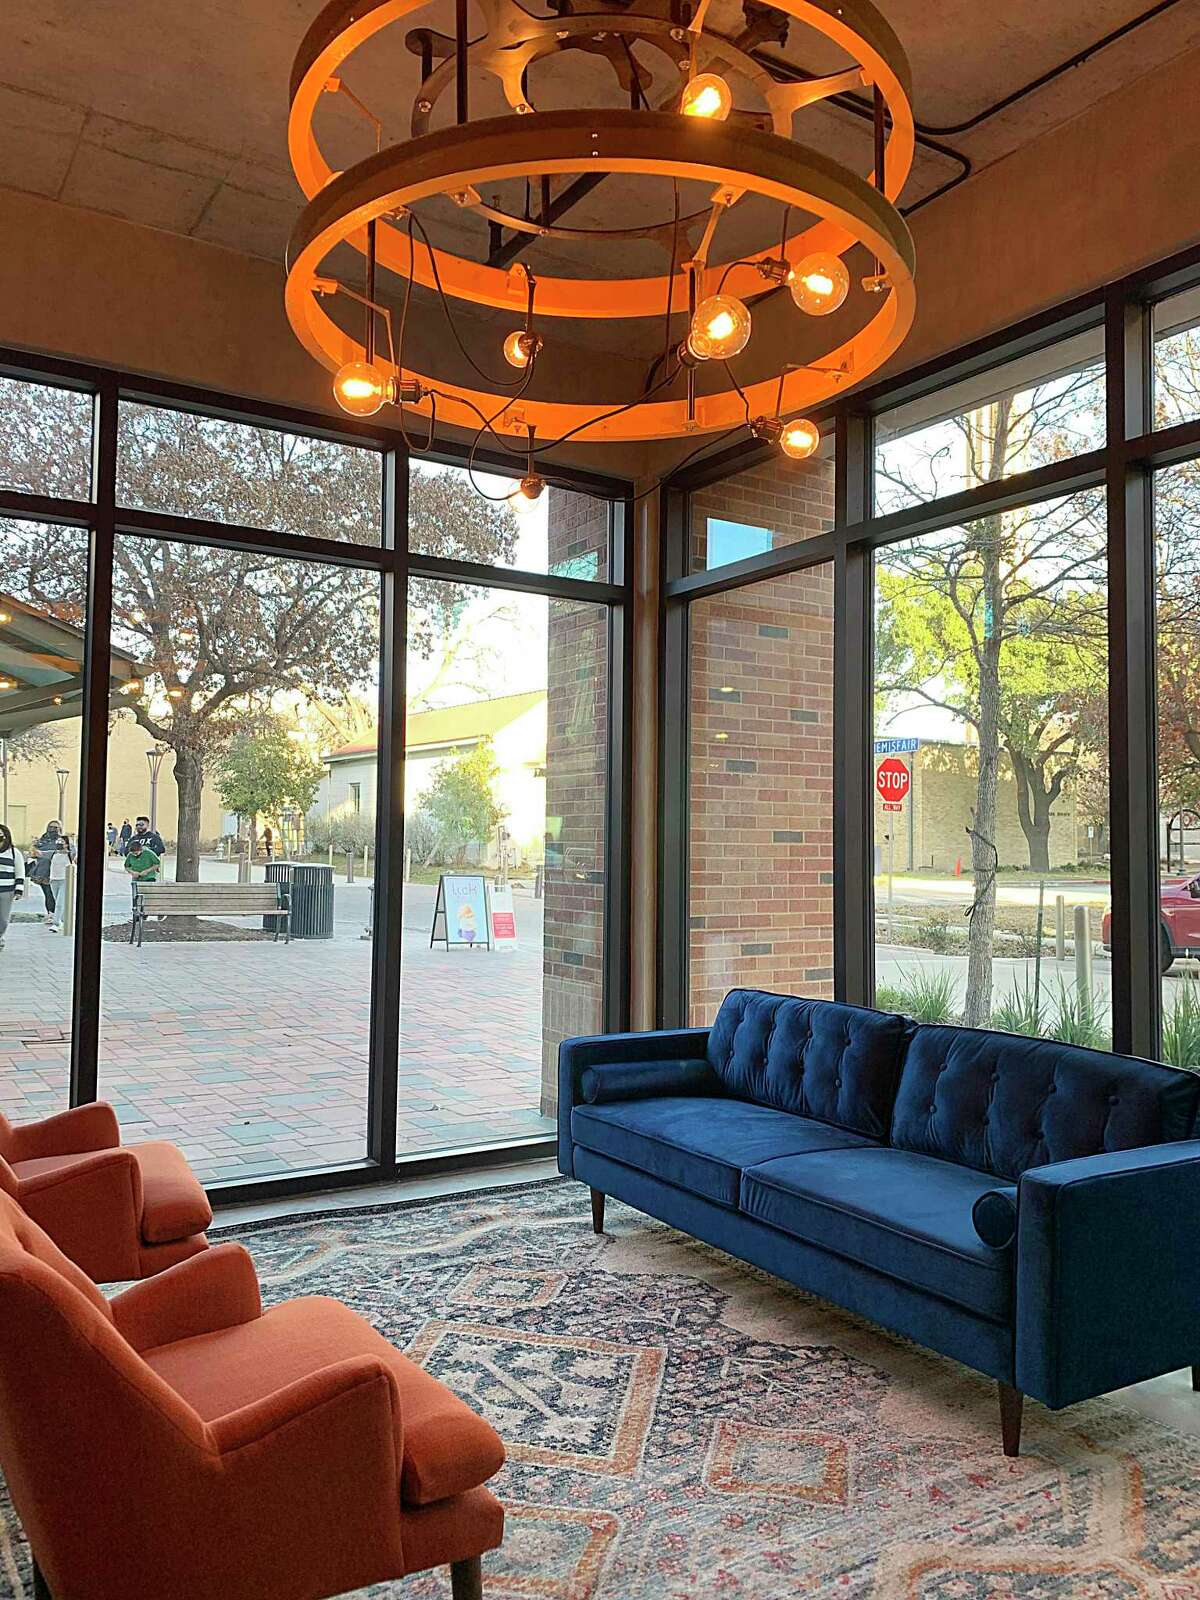 Re:Rooted 210 Urban Winery, a wine bar specializing in Texas wines made and curated by sommelier Jennifer Beckmann, is set to open soon at Hemisfair at the new apartment development The ’68.